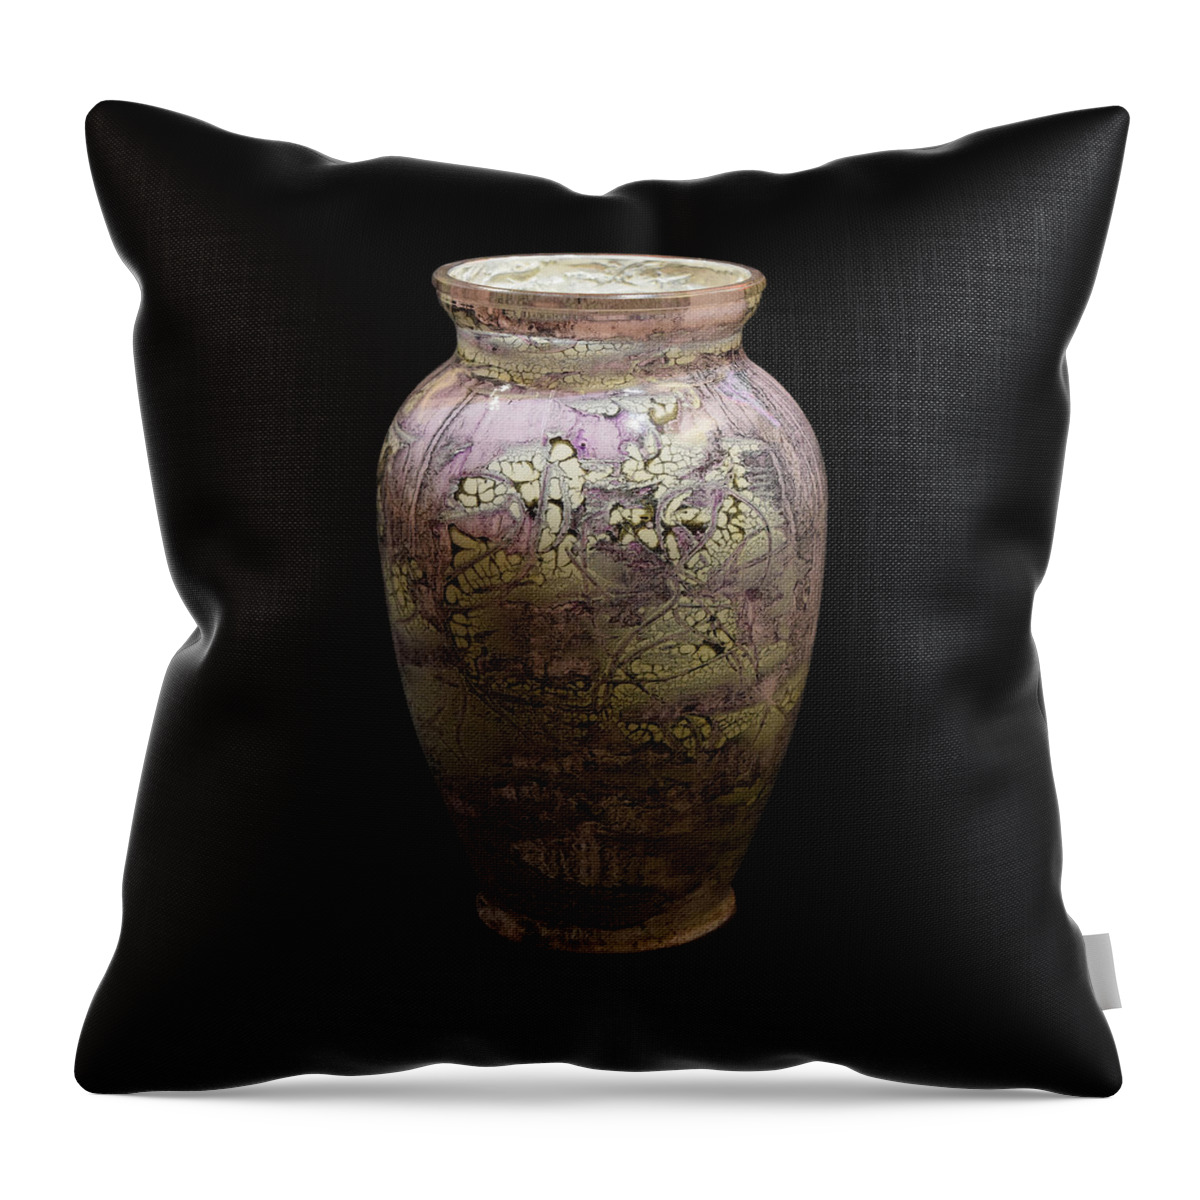 Glass. Violet Throw Pillow featuring the glass art Violet Vase by Christopher Schranck